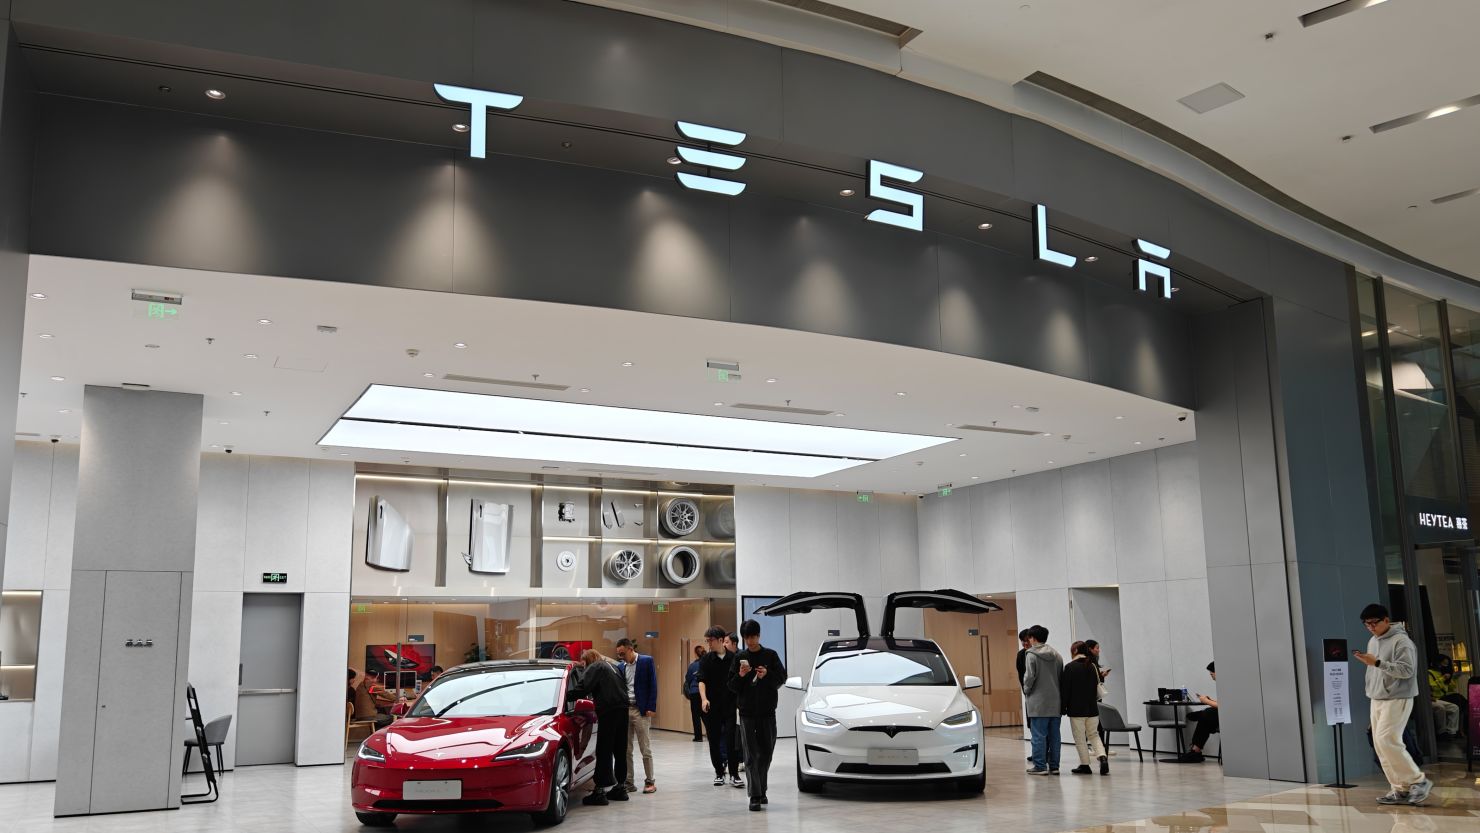 Customers shop at a Tesla new energy vehicle store in Shanghai, China